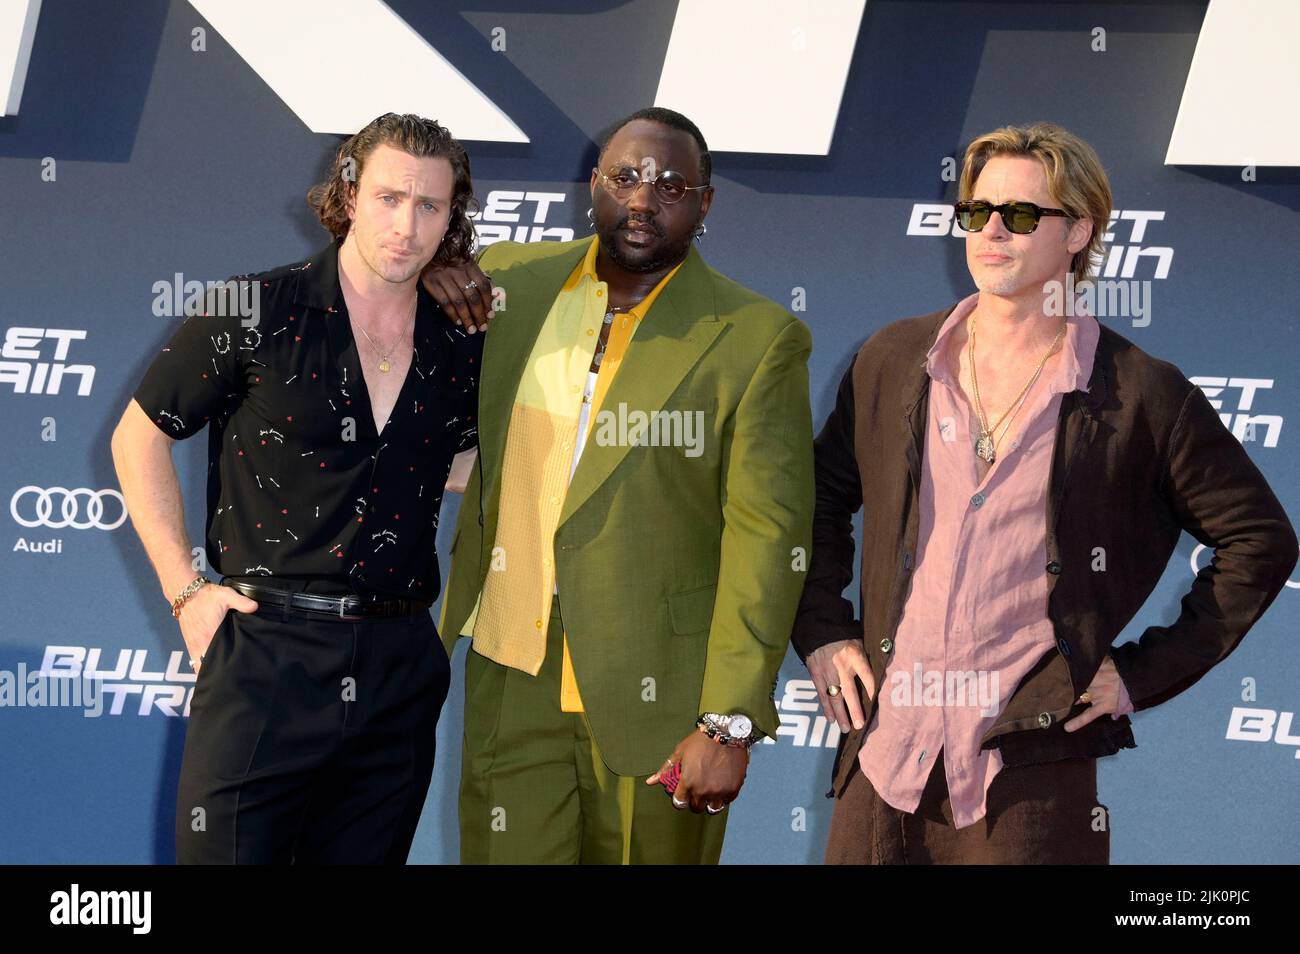 Aaron Taylor-Johnson, Brian Tyree Henry and Brad Pitt attend the 'Bullet Train' Special Screening at Zoo Palast on July 19, 2022 in Berlin, Germany. Stock Photo